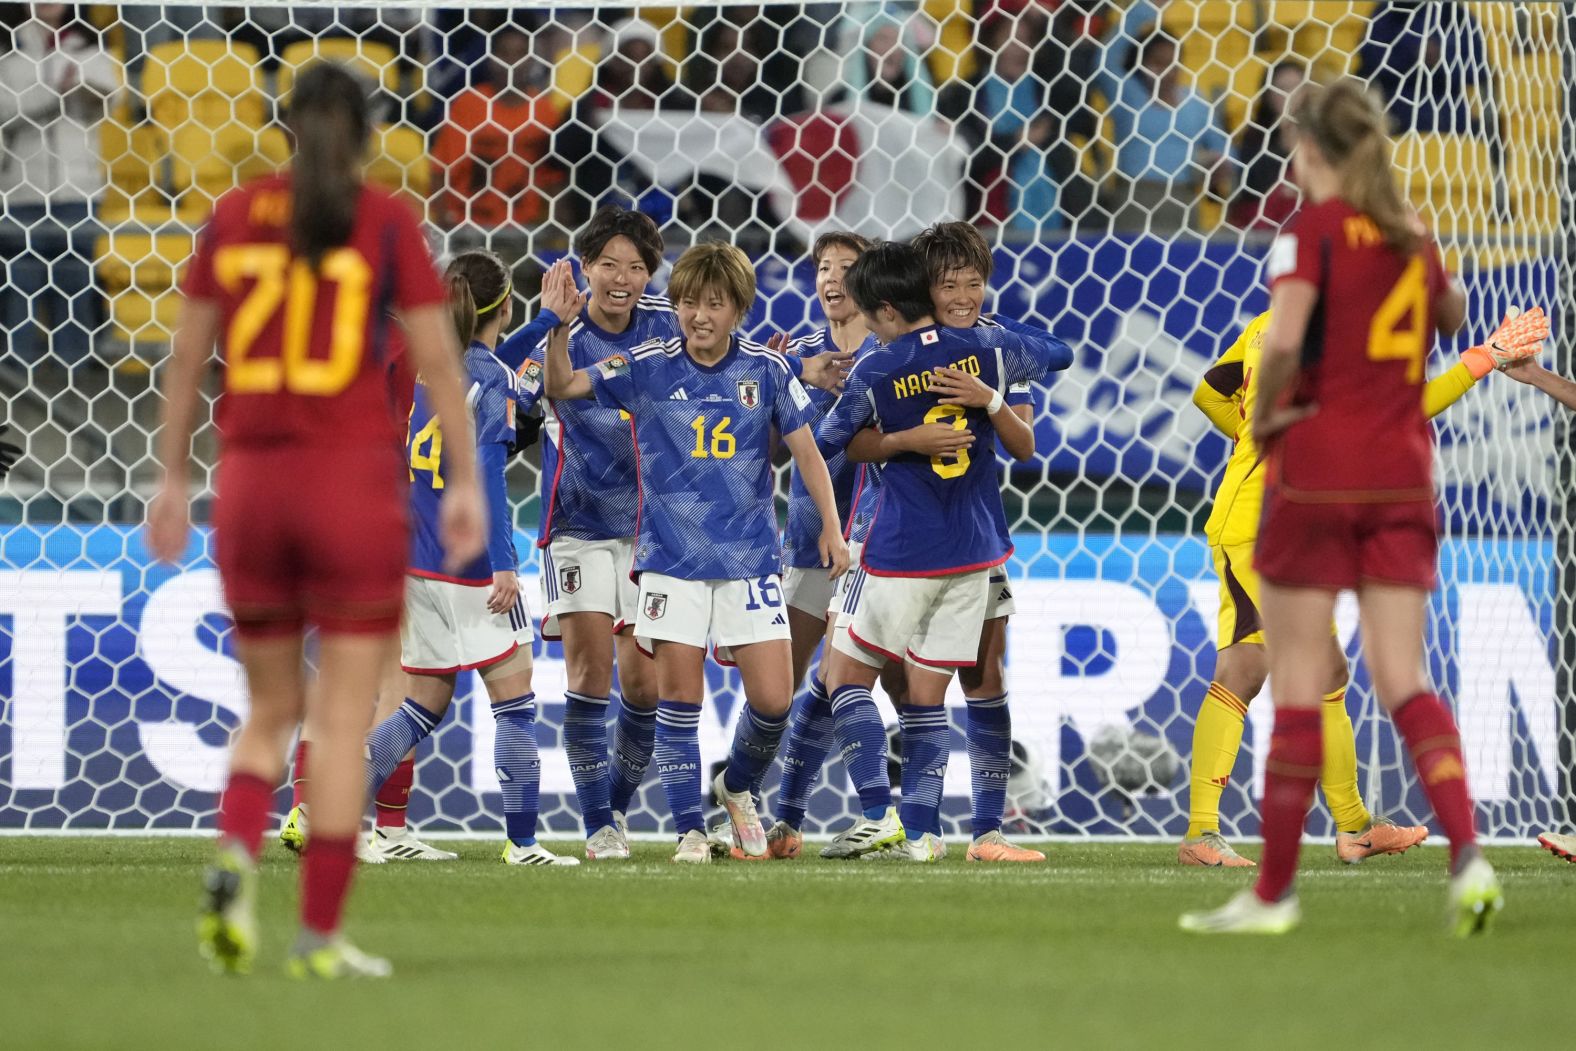 Japanese players celebrate at the end of their <a href="index.php?page=&url=https%3A%2F%2Fedition.cnn.com%2F2023%2F07%2F30%2Ffootball%2Fnigeria-canada-australia-womens-world-cup-spt-intl%2Findex.html" target="_blank">4-0 victory over Spain</a> on July 31. Both teams are advancing to the round of 16.